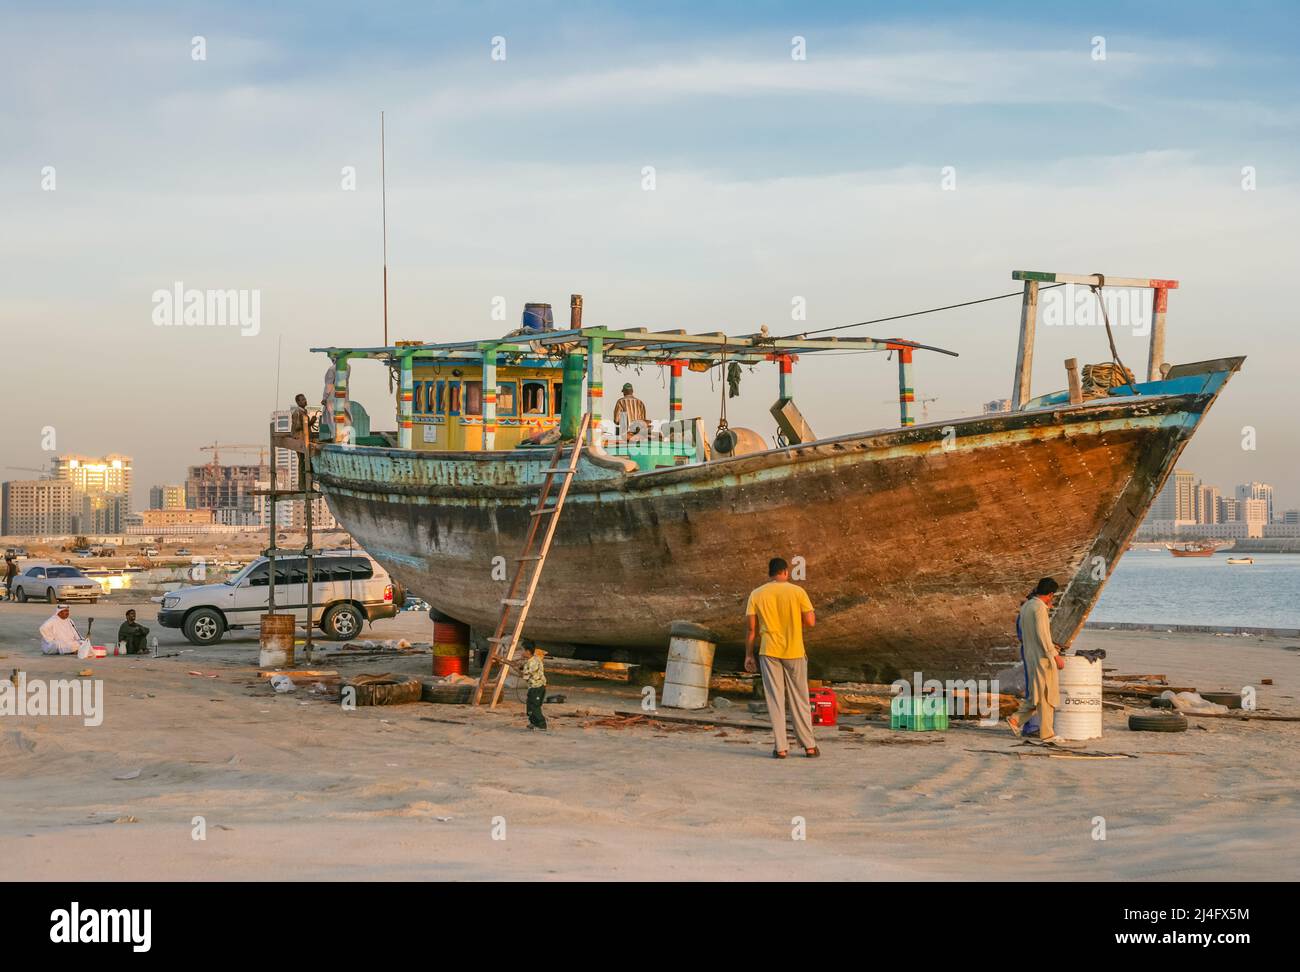 Labourers renovating a wooden dhow in Al Khan, in the the city of Sharjah, United Arab Emirates. Stock Photo